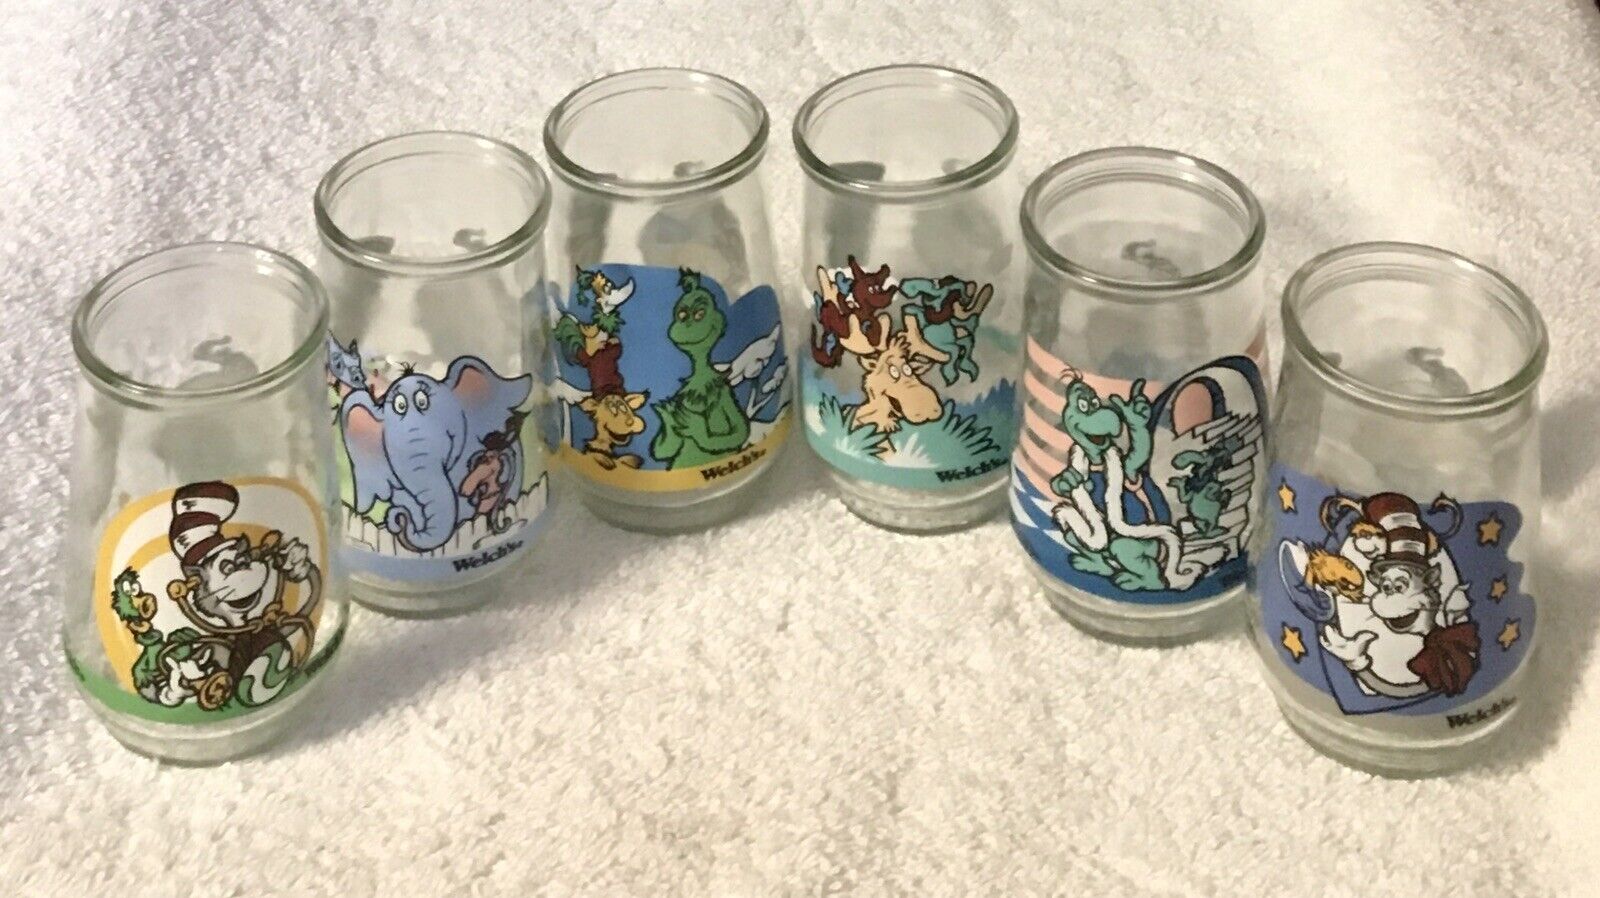 Dr Seuss 1996 Welch’s Complete  Set of 6 Jelly Jar Glasses Juice Anchor Hocking